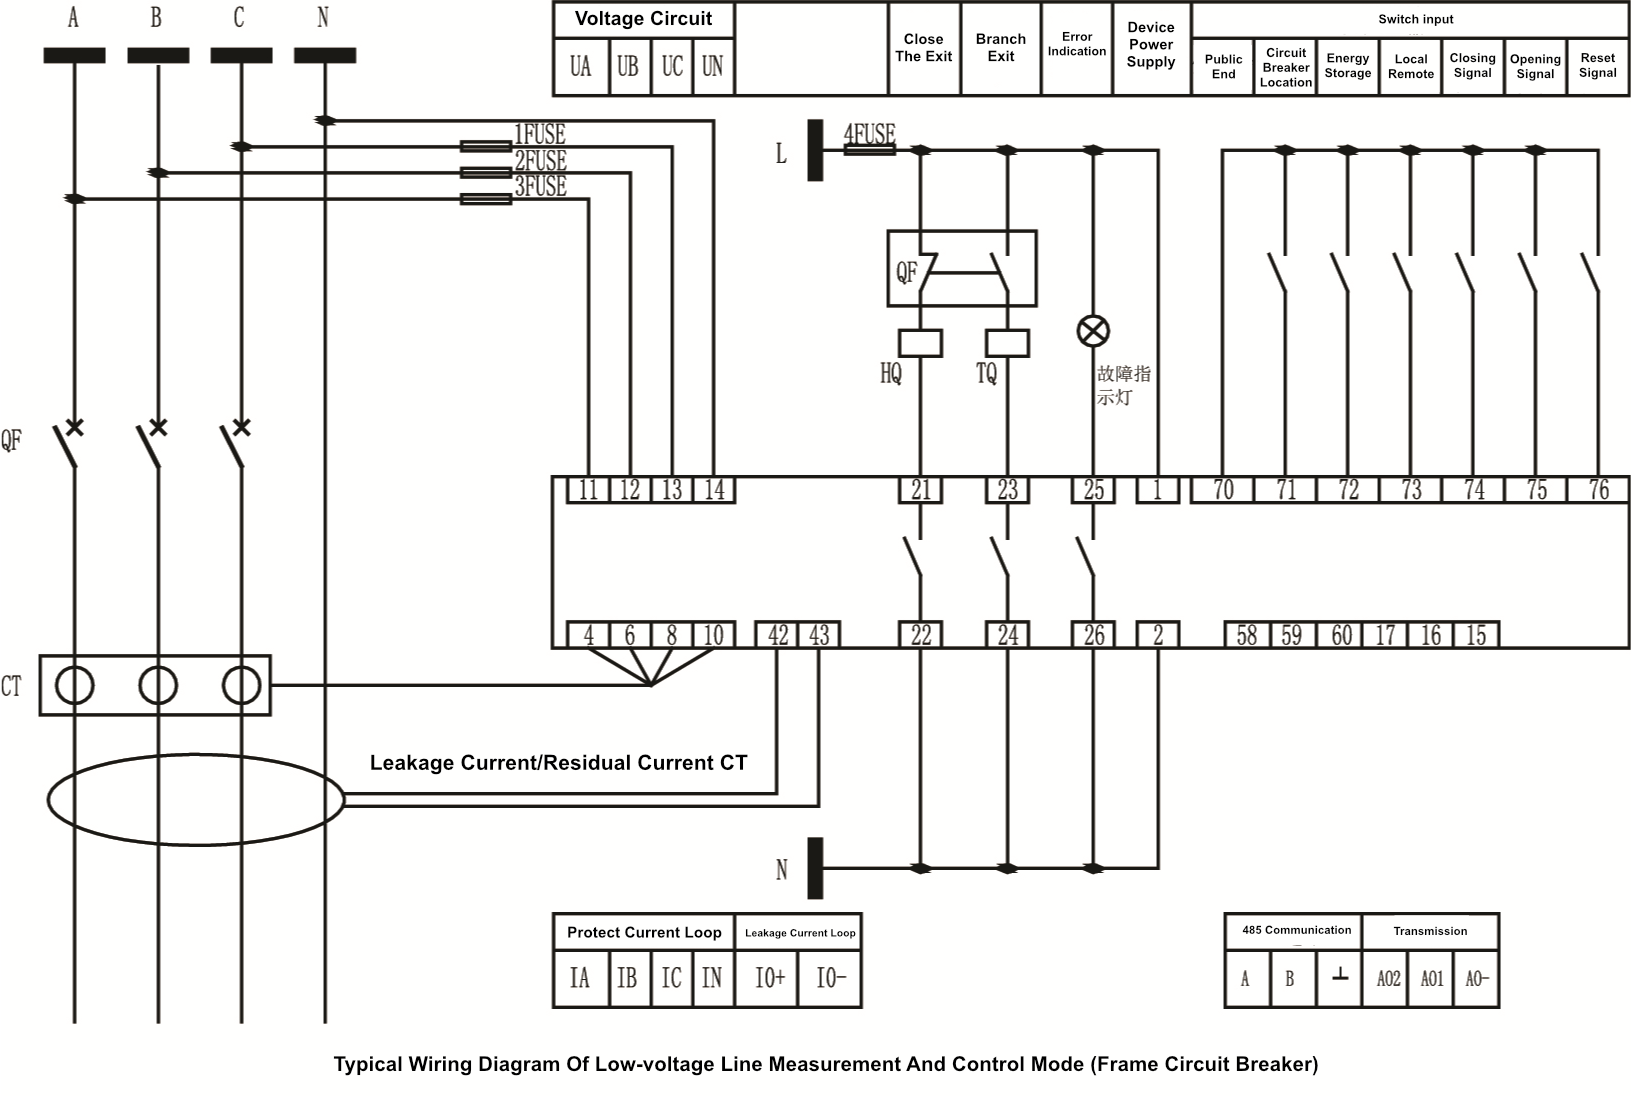 motor line protection relay typical wiring diagram of measurement and control mode (frame circuit breaker)